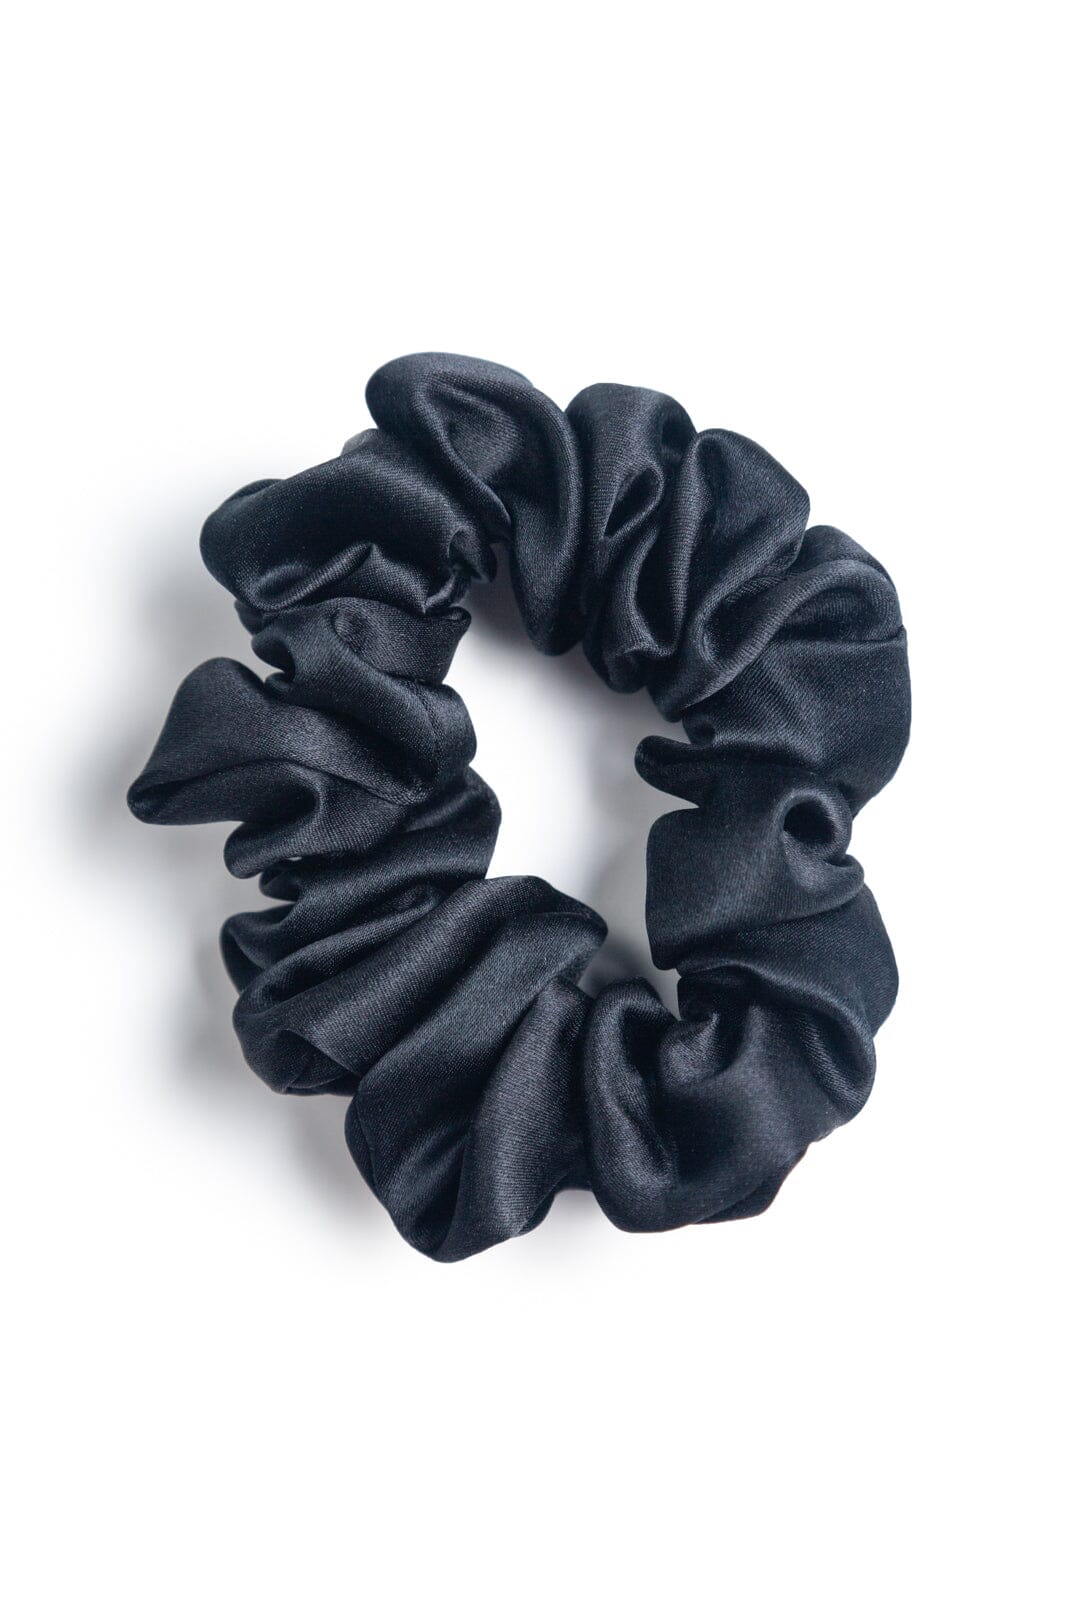 Silk Hair Scrunchies | Sets of 3 Scrunchies | Fishers Finery